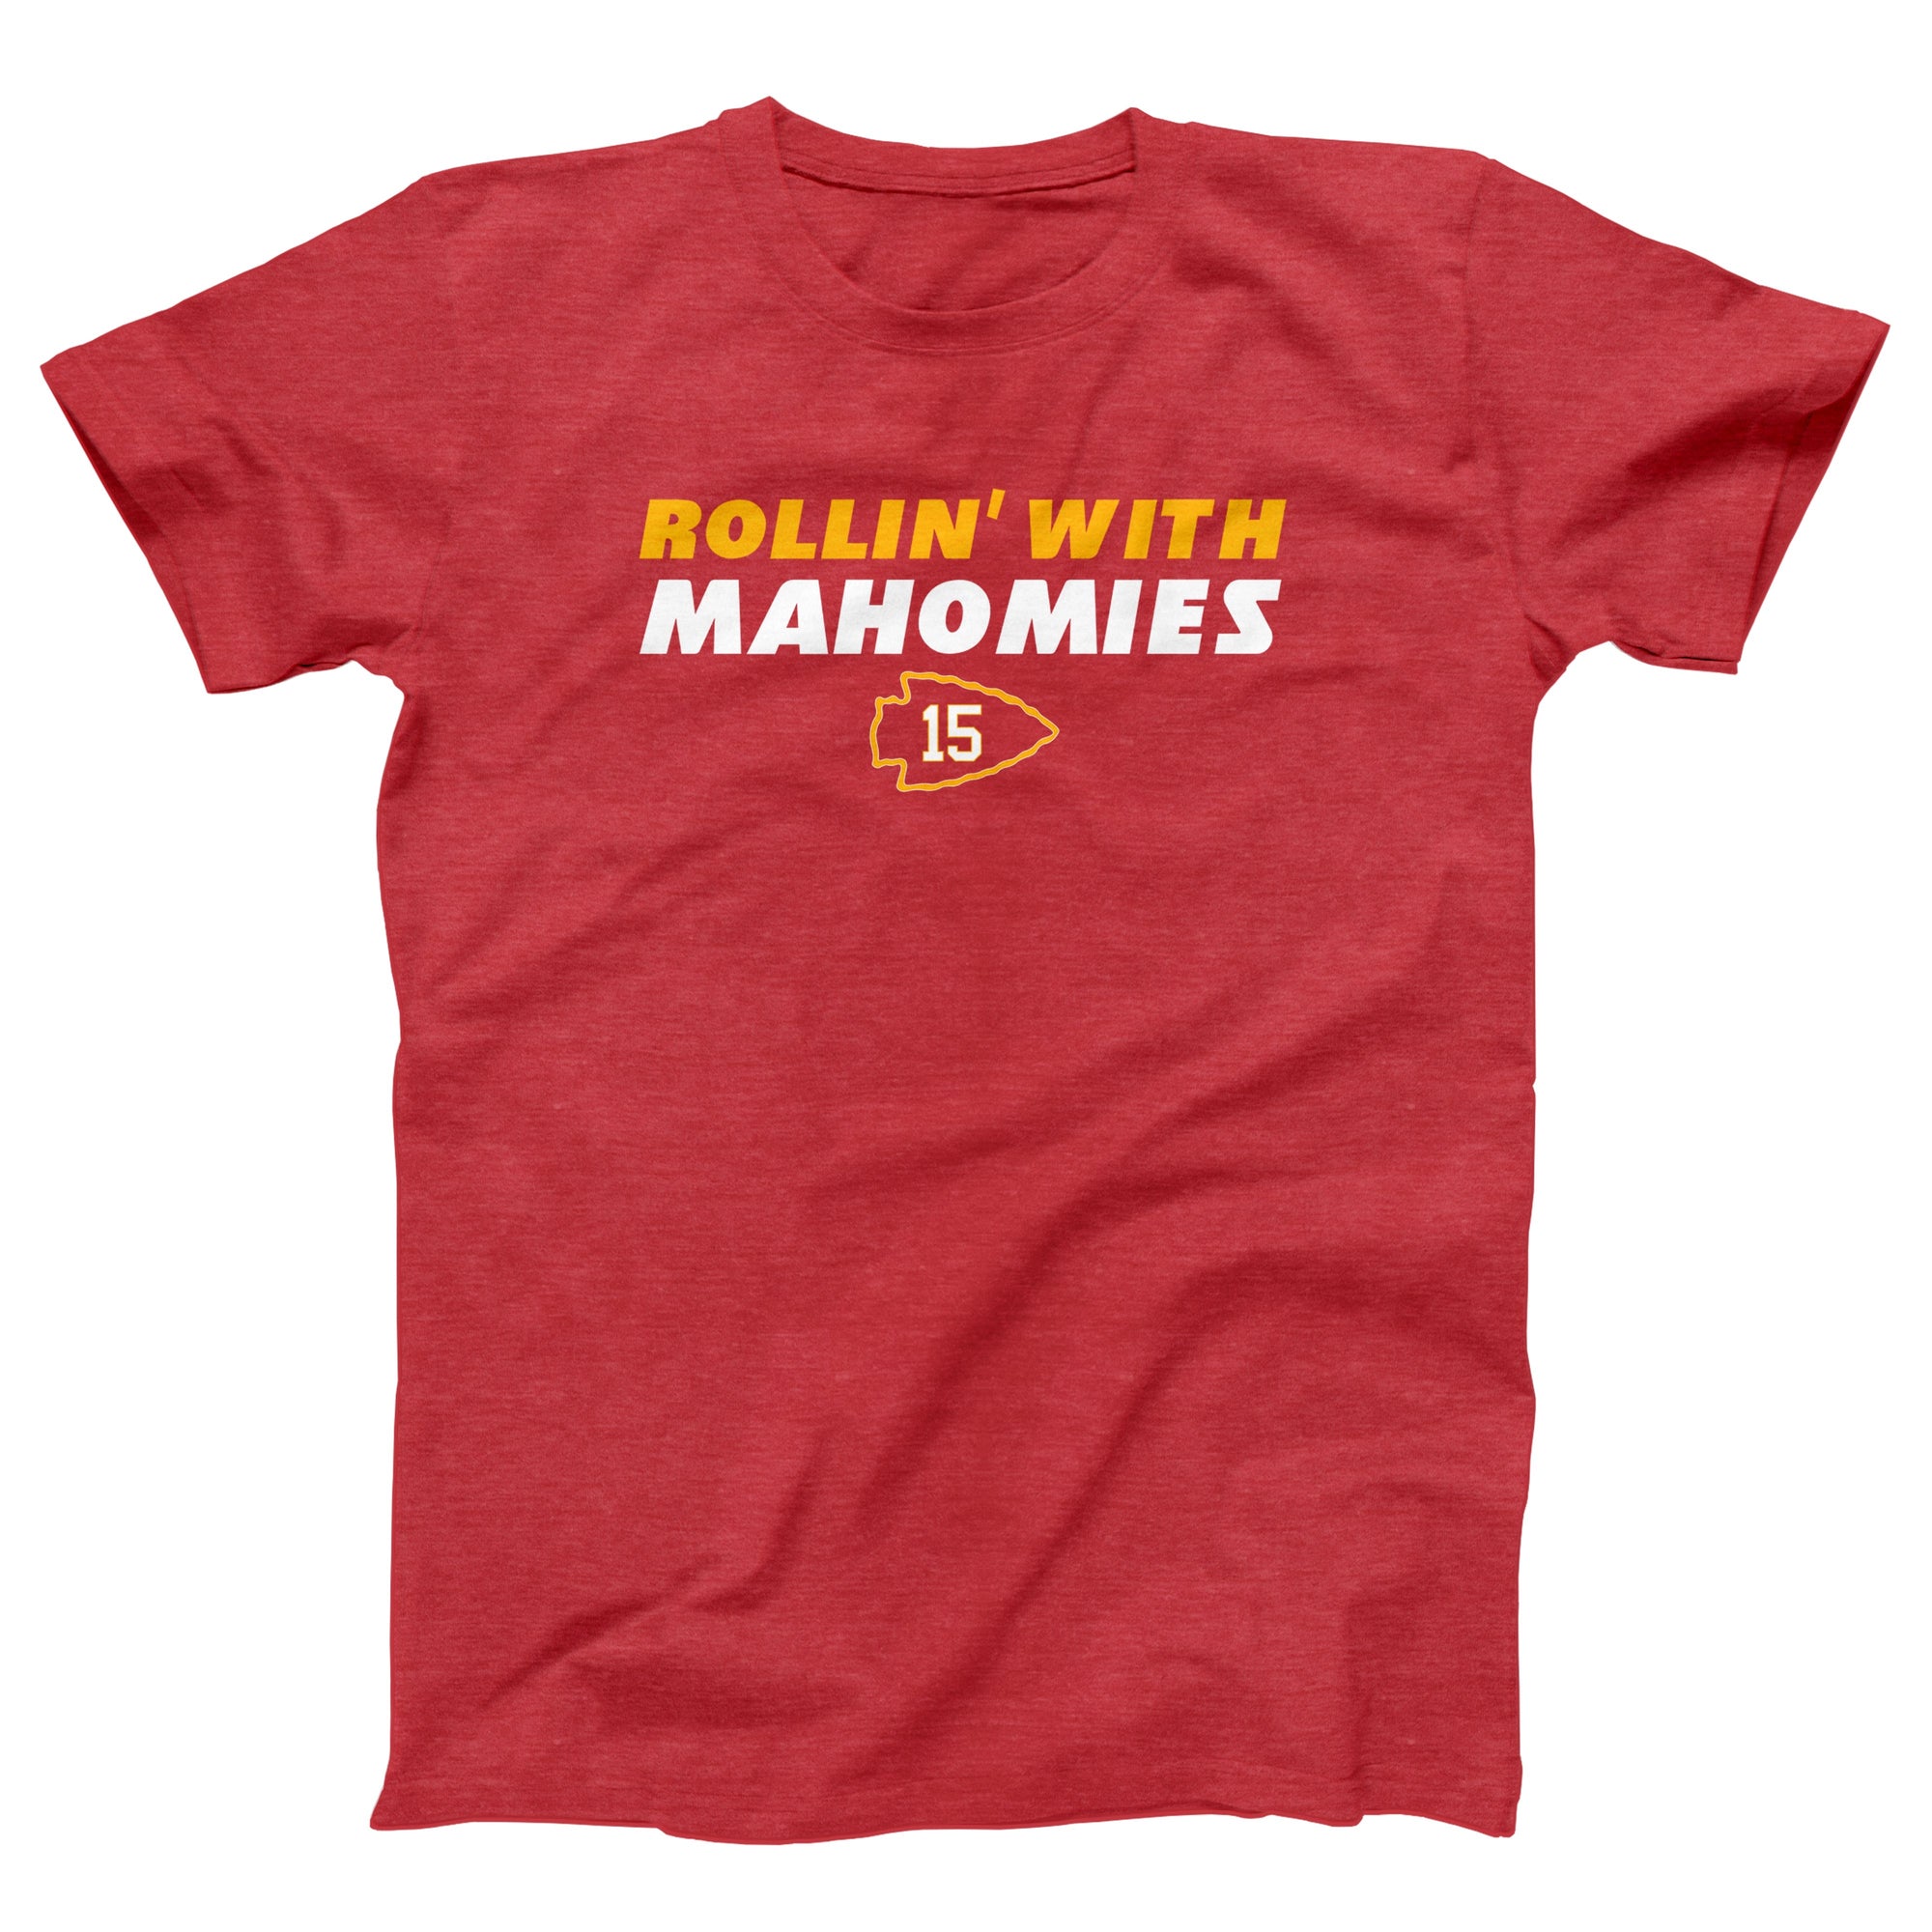 Rollin' With Mahomies Adult Unisex T-Shirt